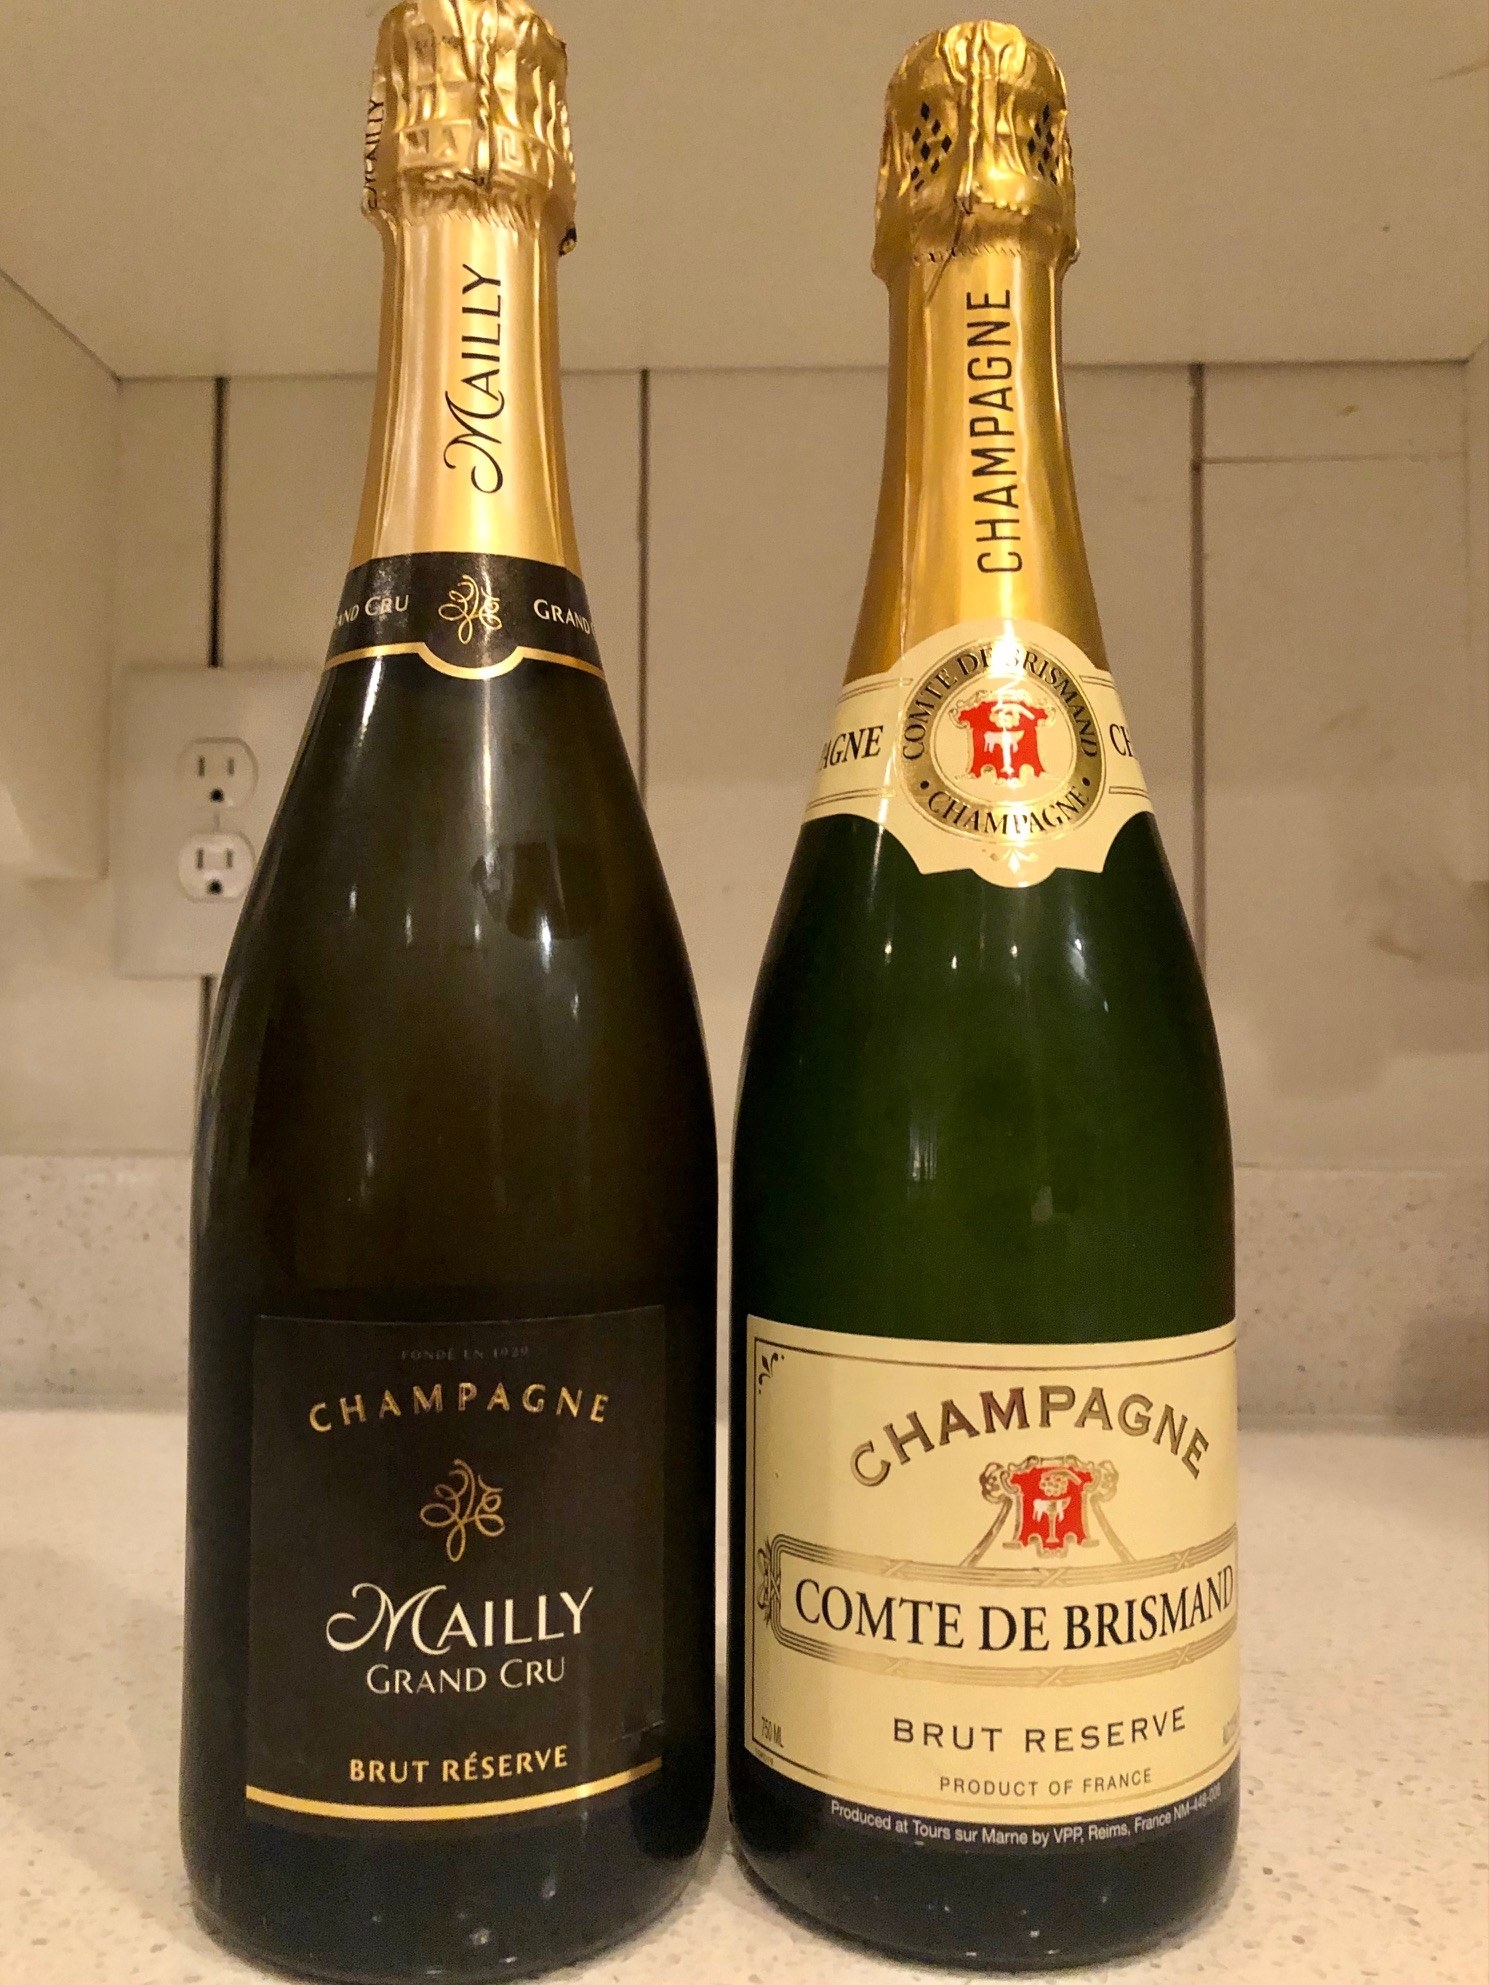 Two bottles of Champagne